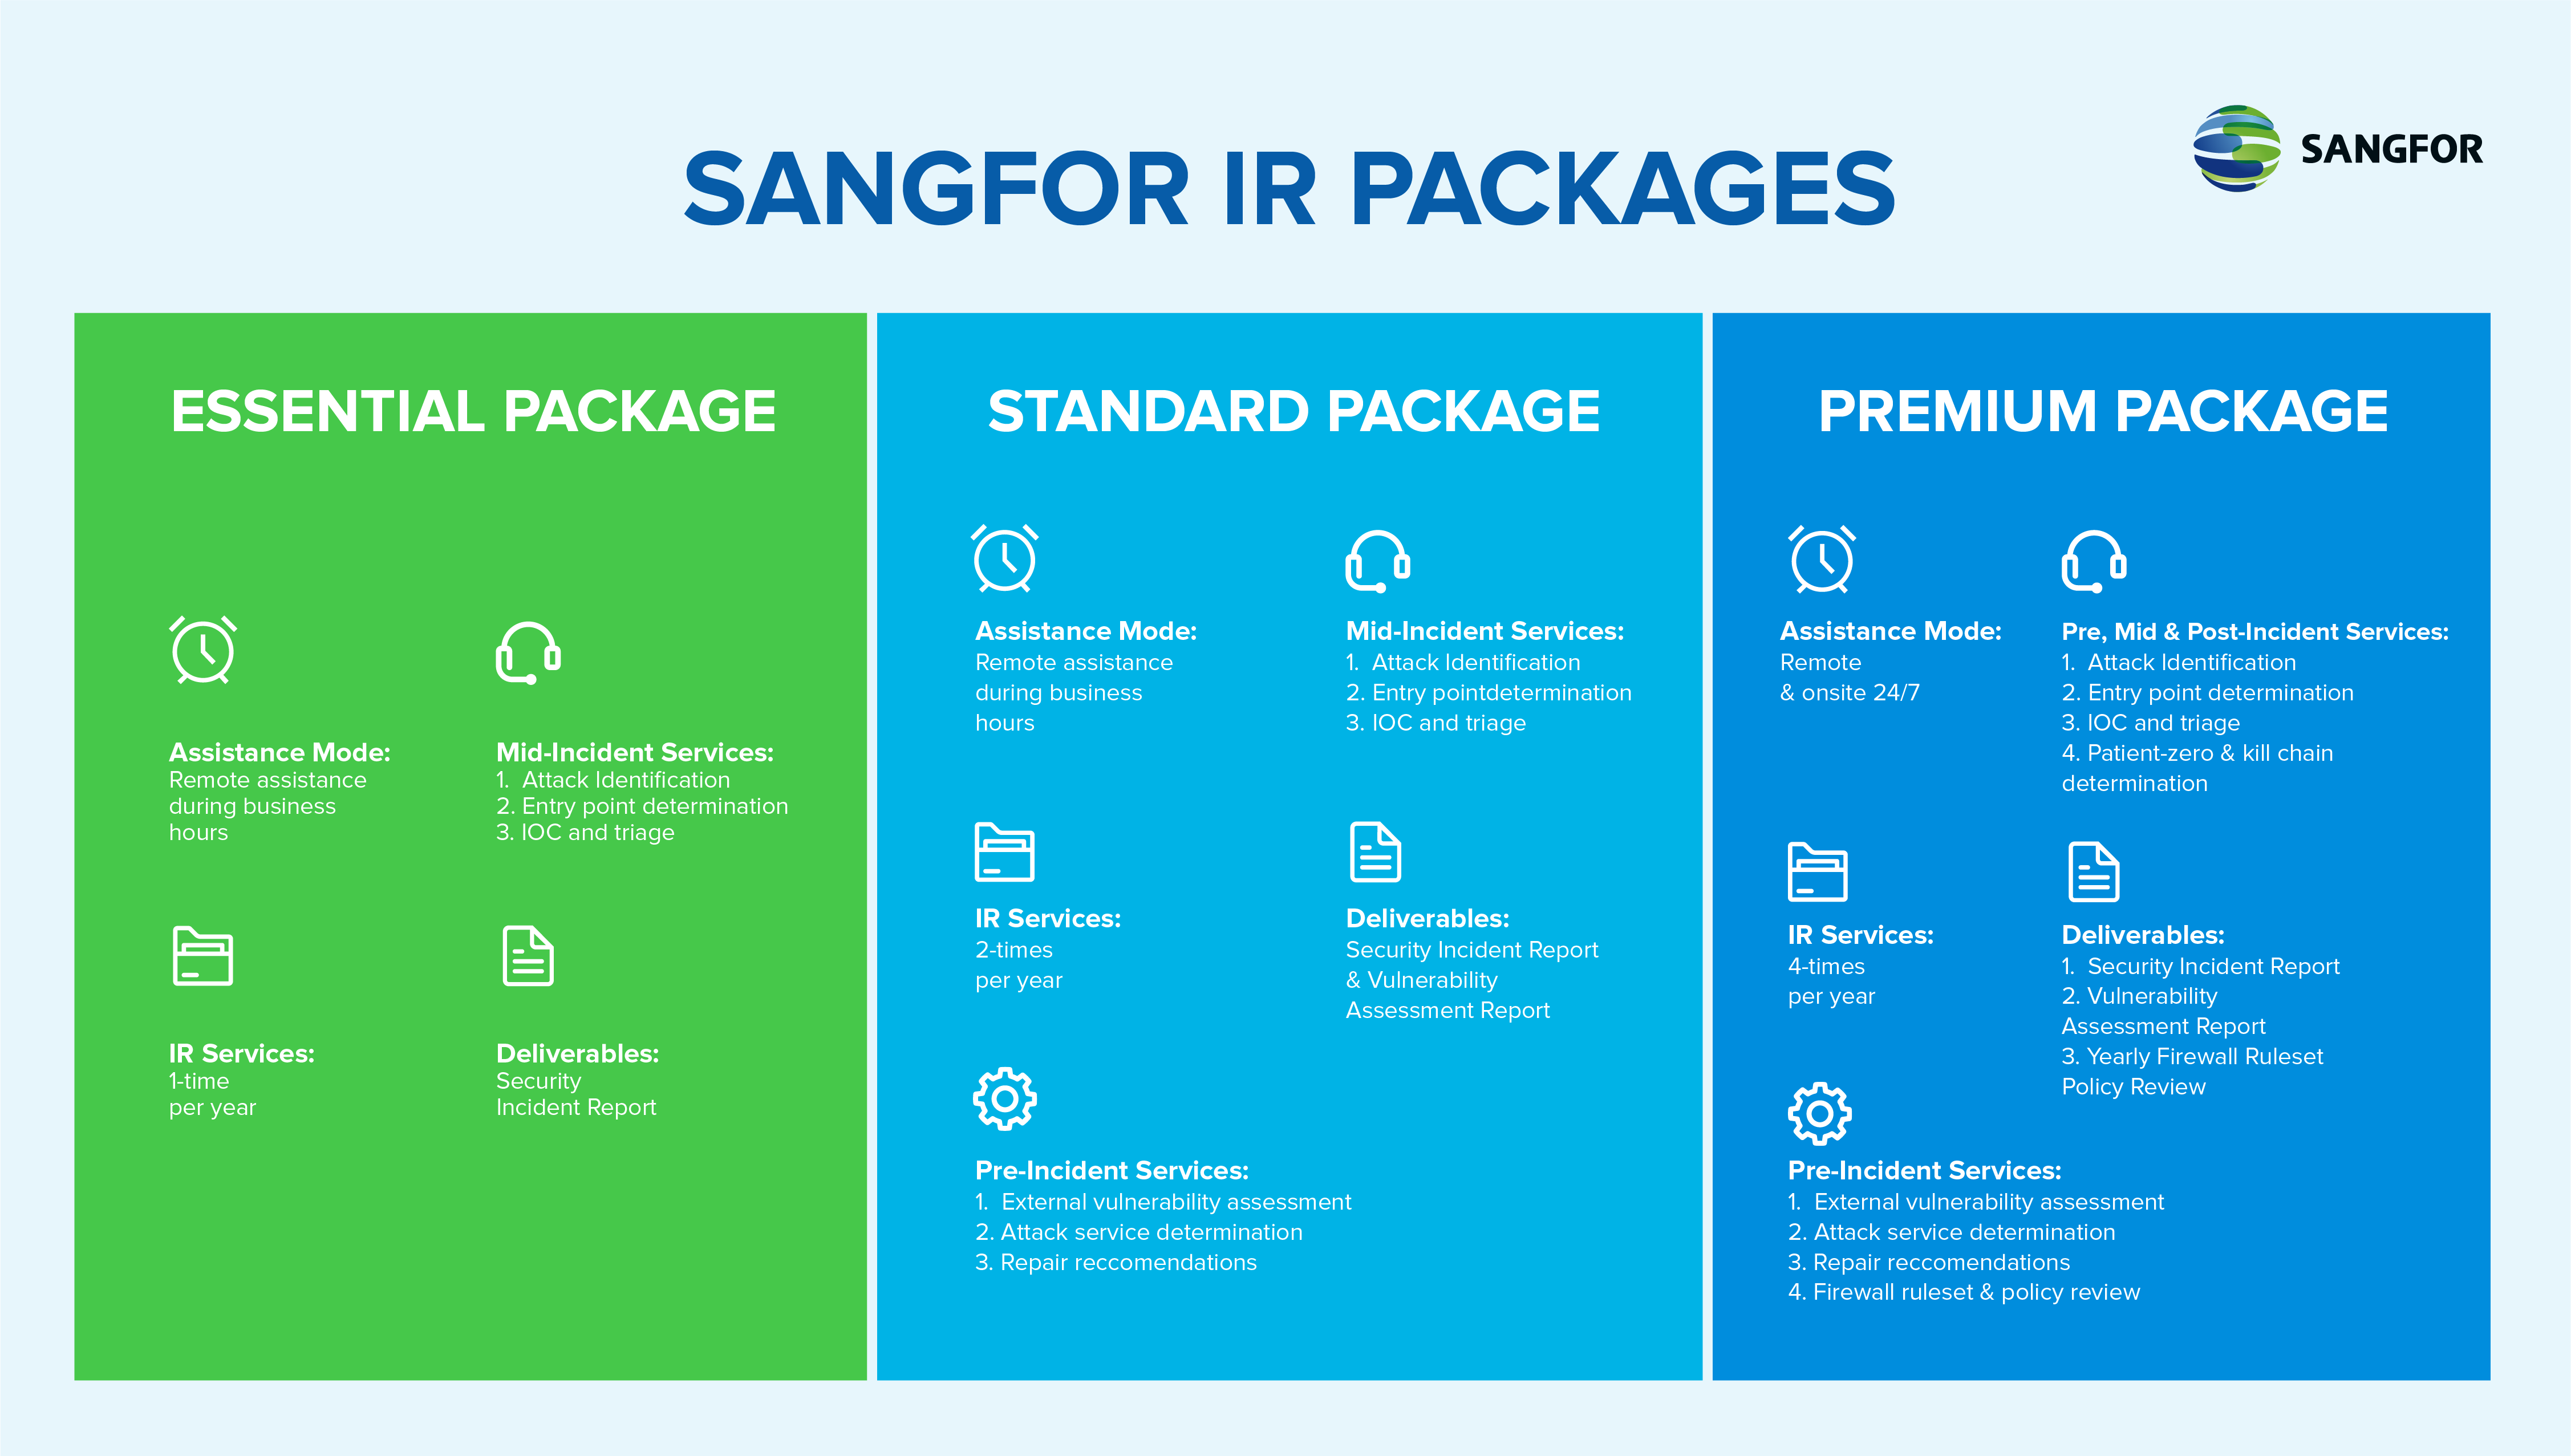 Sangfor IR Packages